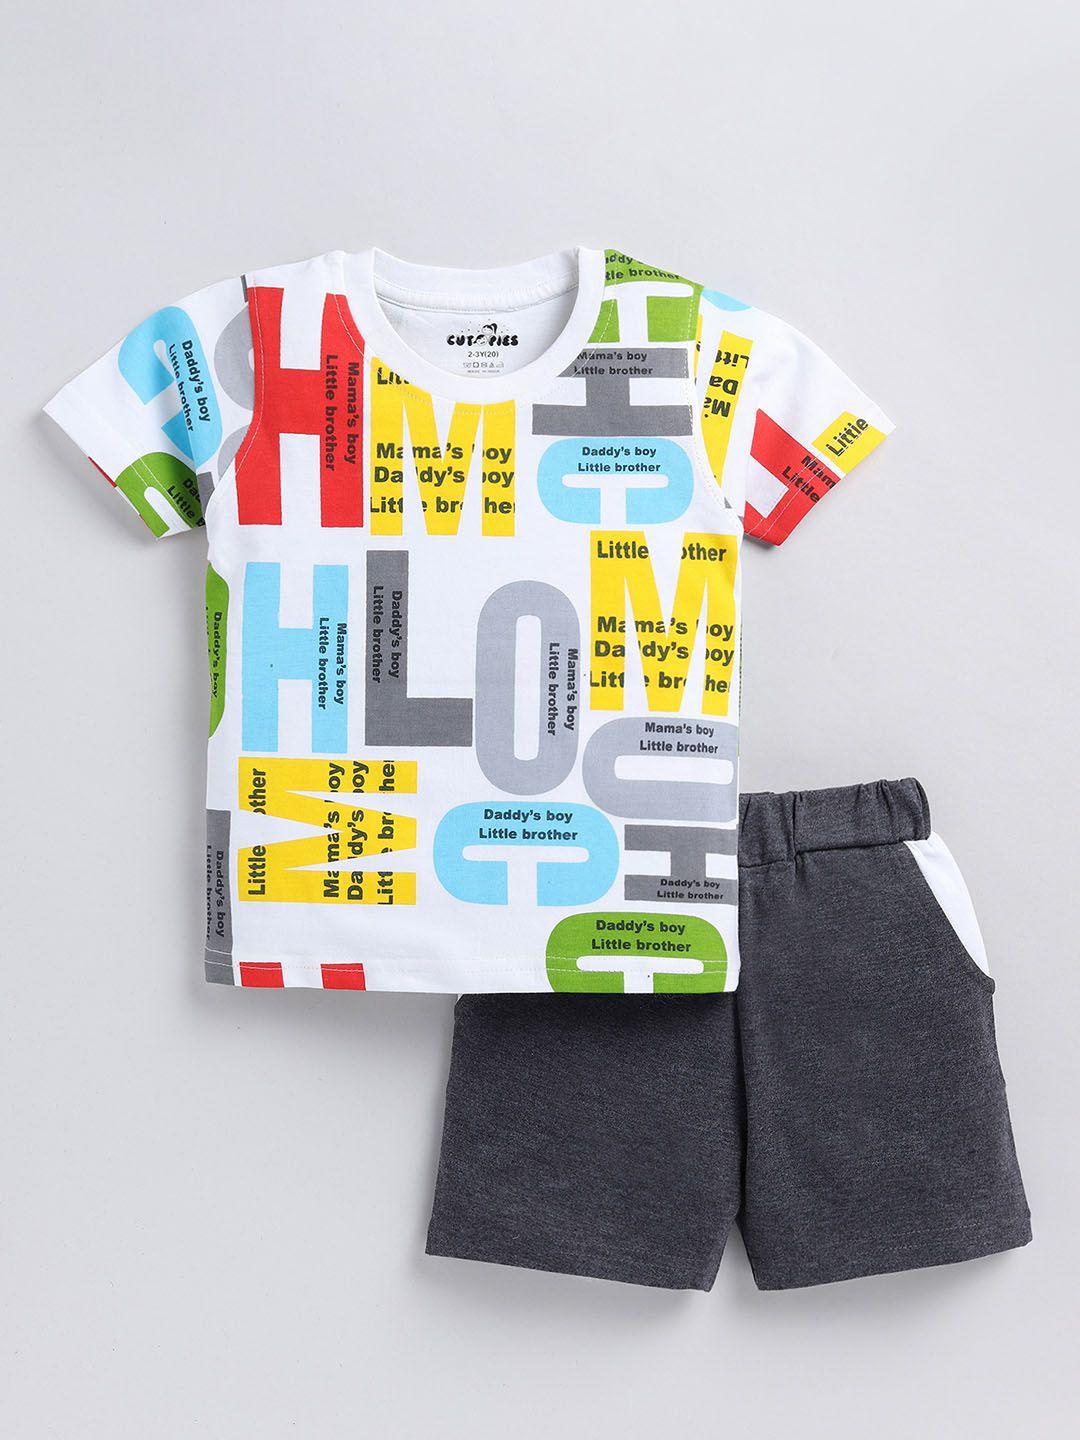 baesd boys printed cotton t-shirt with shorts